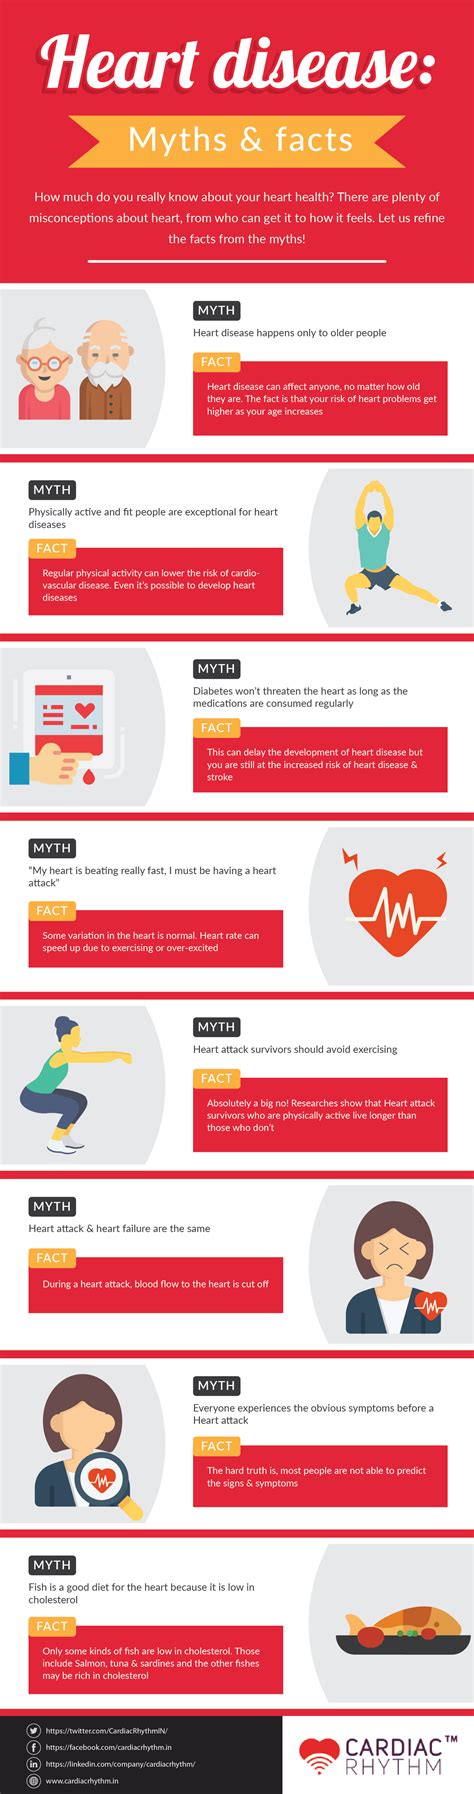 myths and facts of heart disease [infographic]